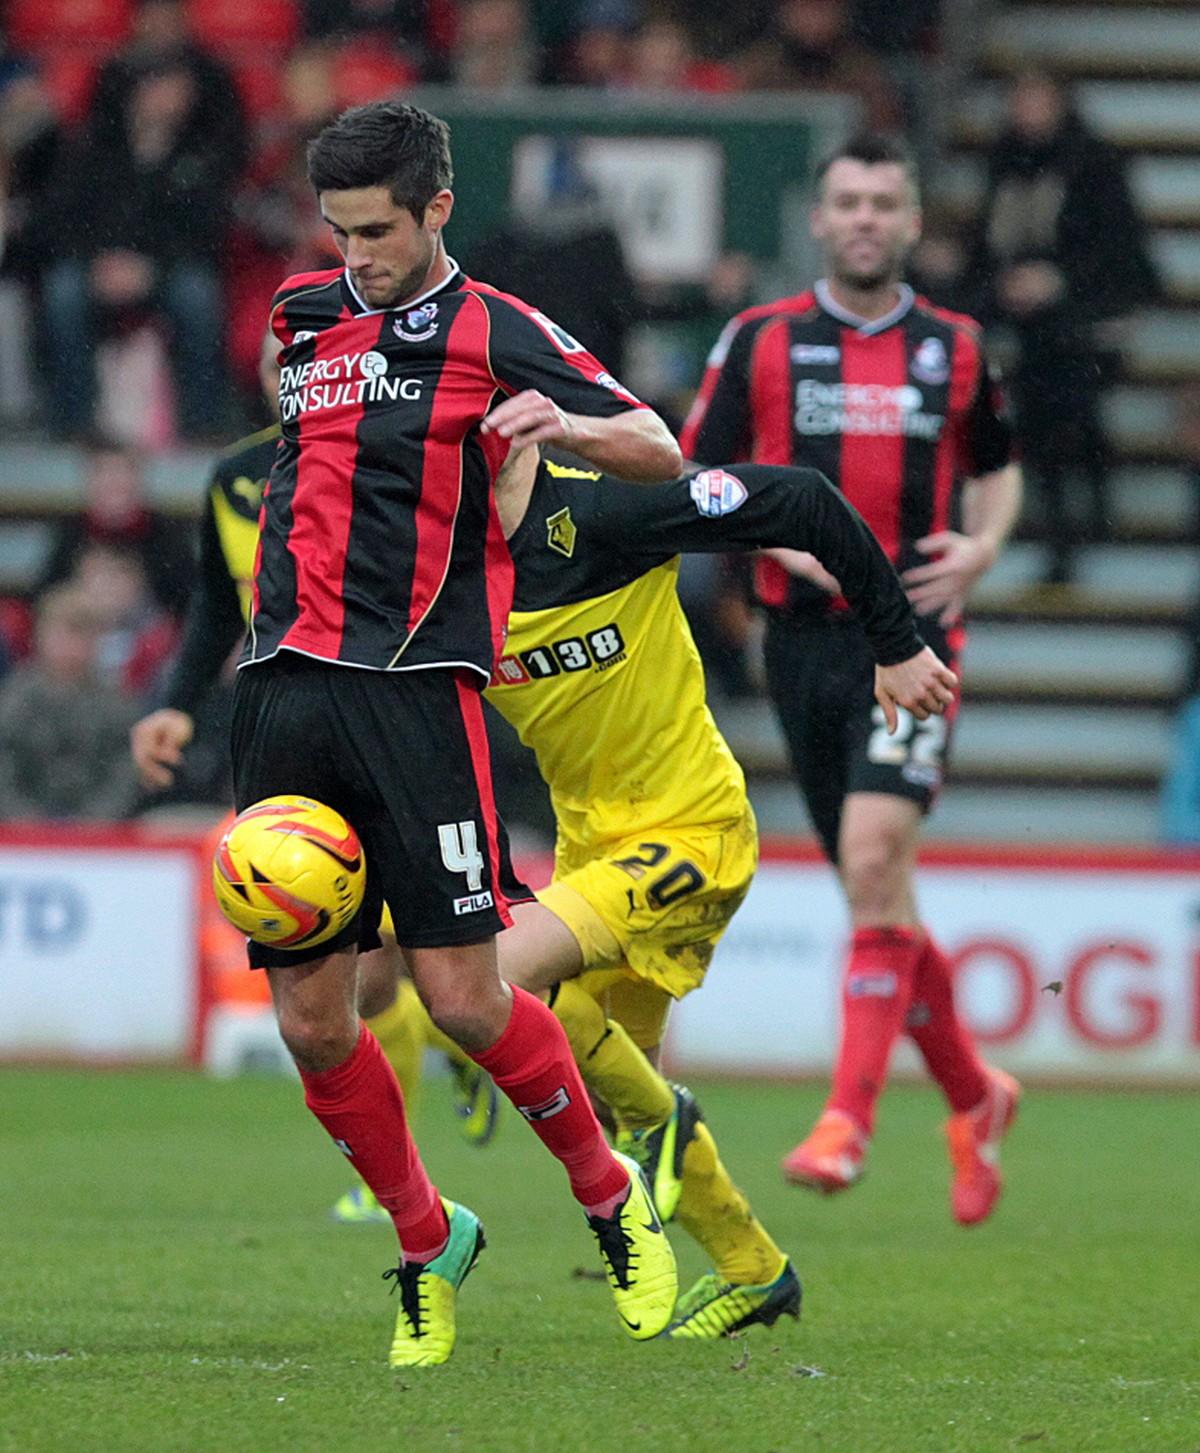 All our pictures from AFC Bournemouth v Watford at Dean Court on Saturday, January 18, 2014.